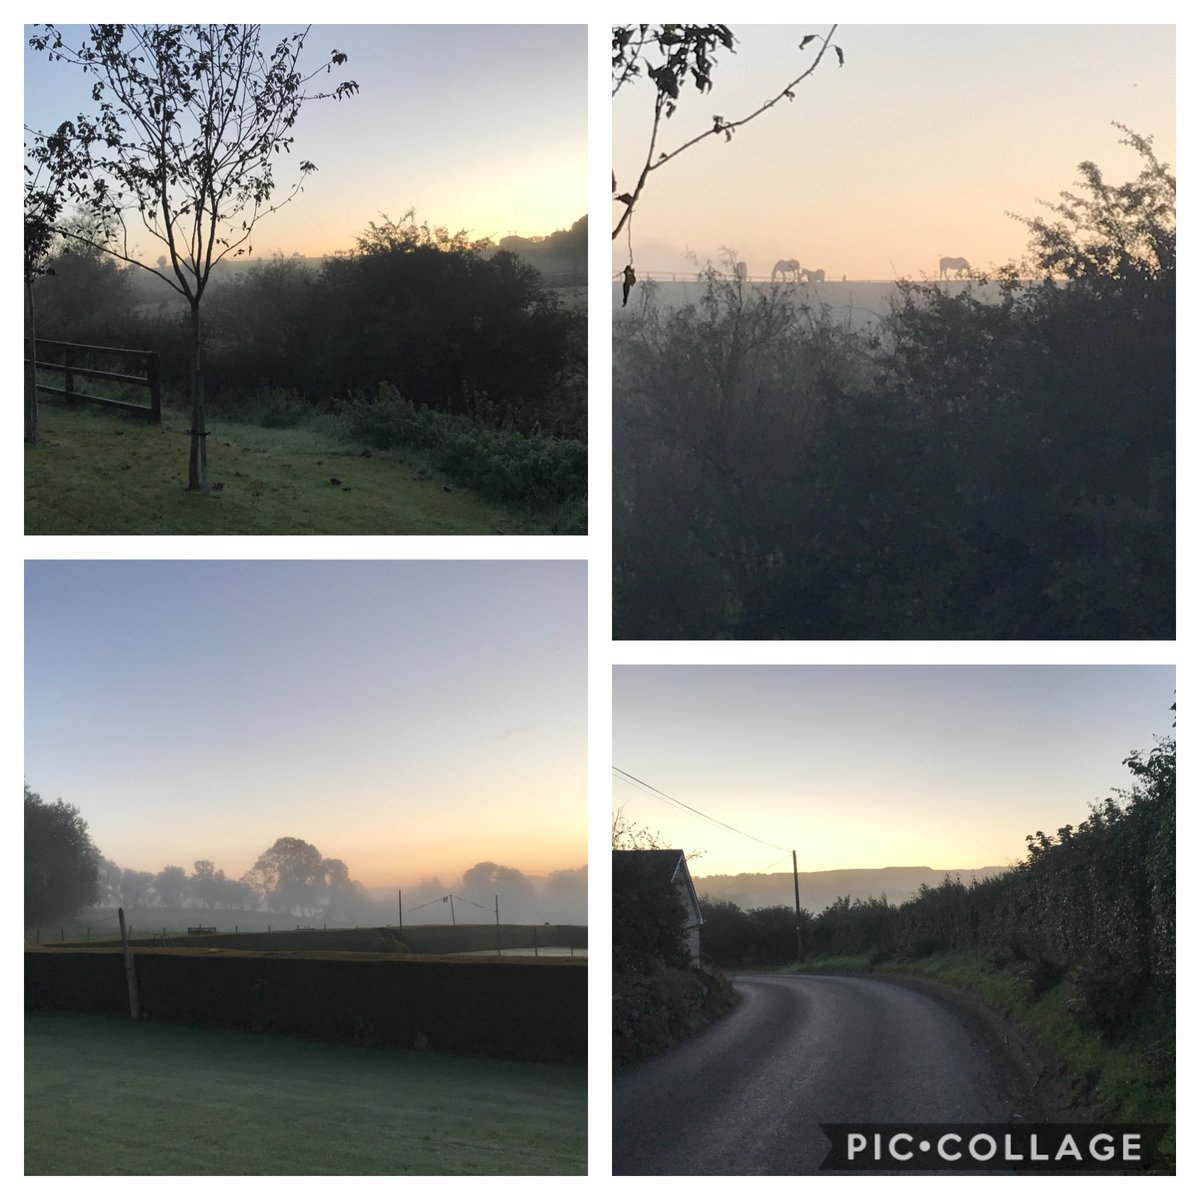 The dawning of an Autumn day in #WestWicklow. Good health to #everyone